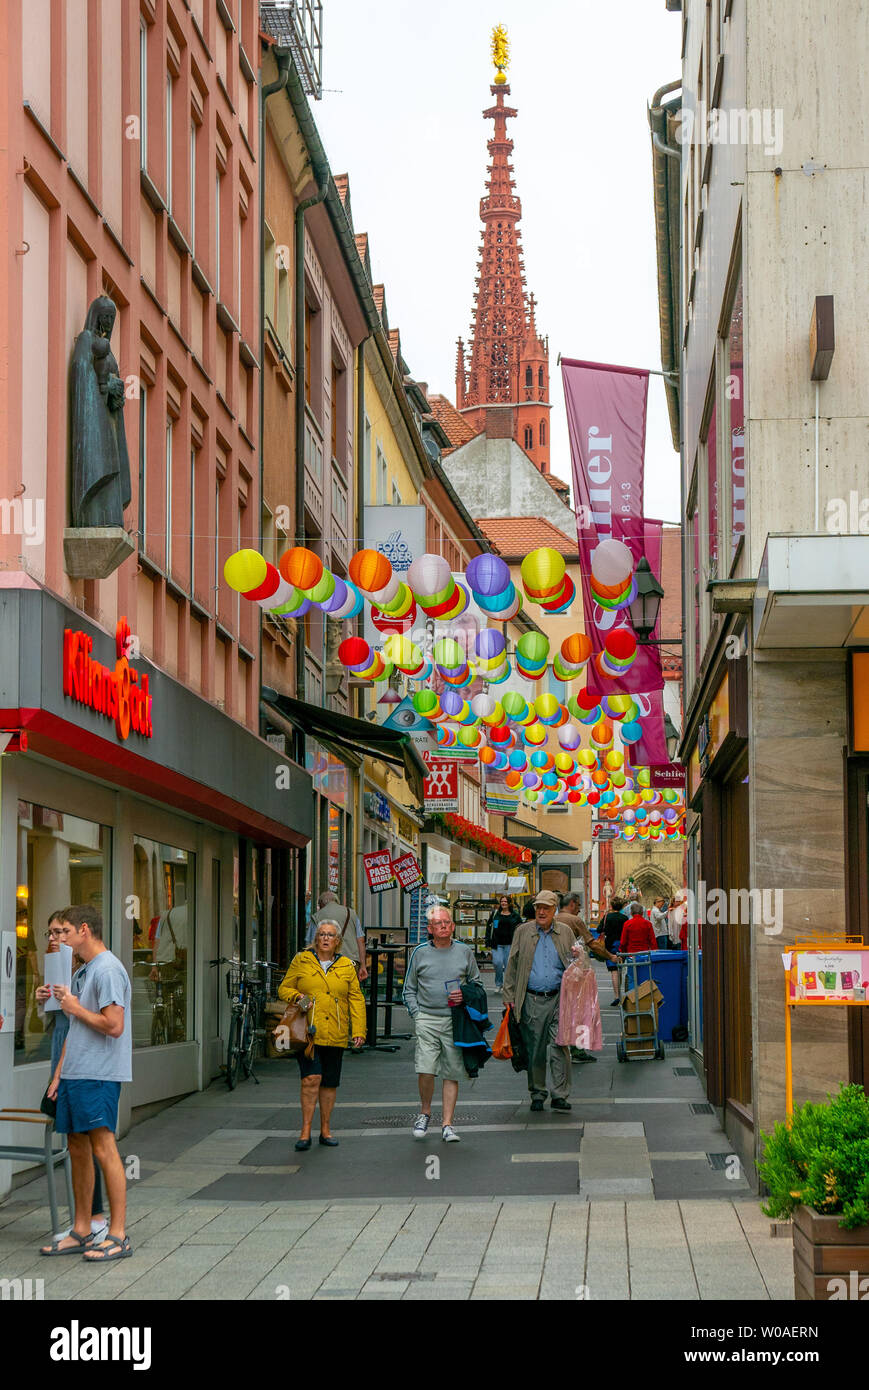 WURZBURG, GERMANY - JUNE 12, 2019: Schuster alley decorated with balloons Stock Photo